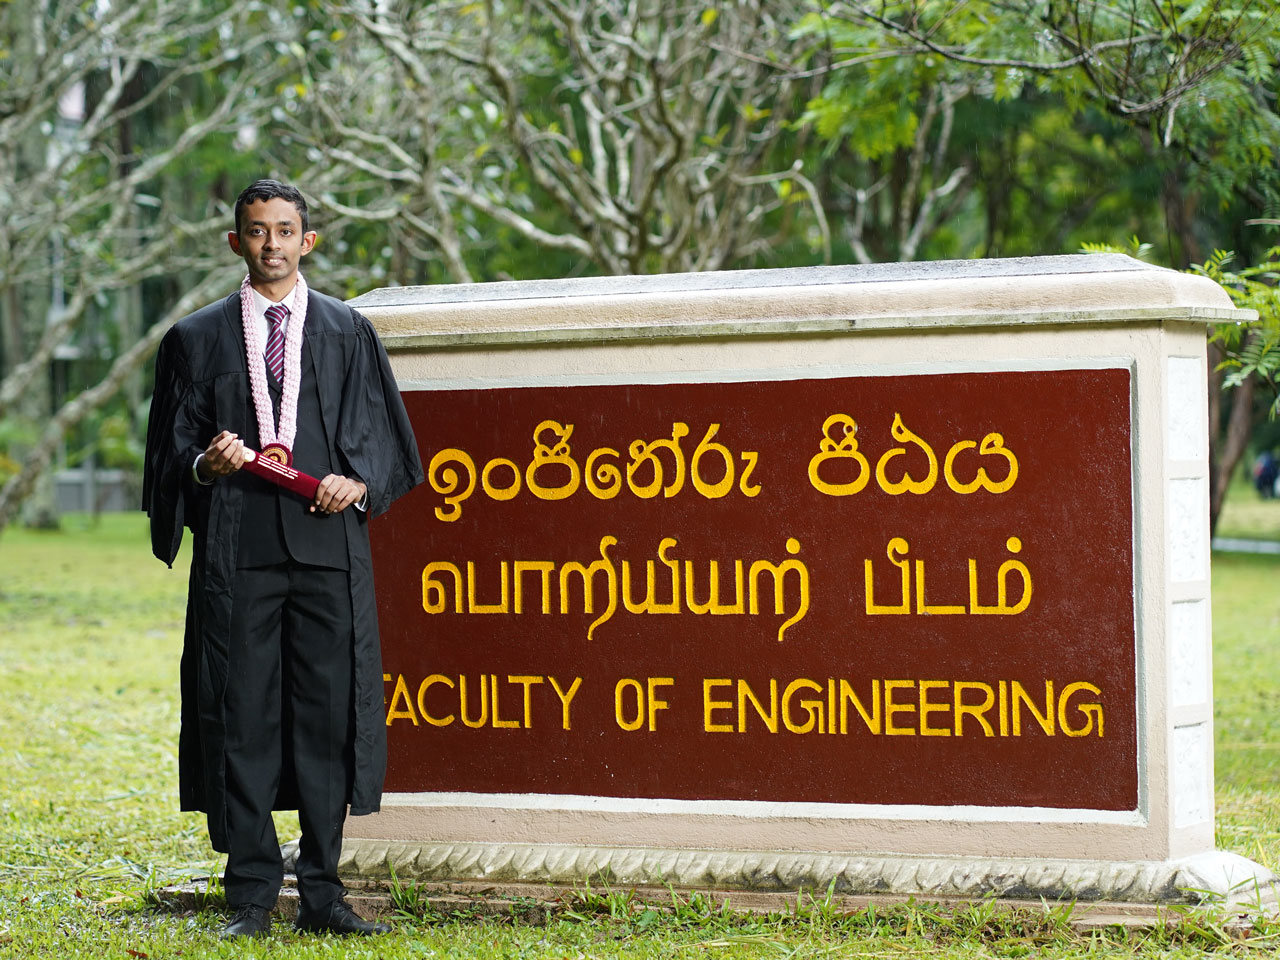 At the entrance to the Engineering Faculty